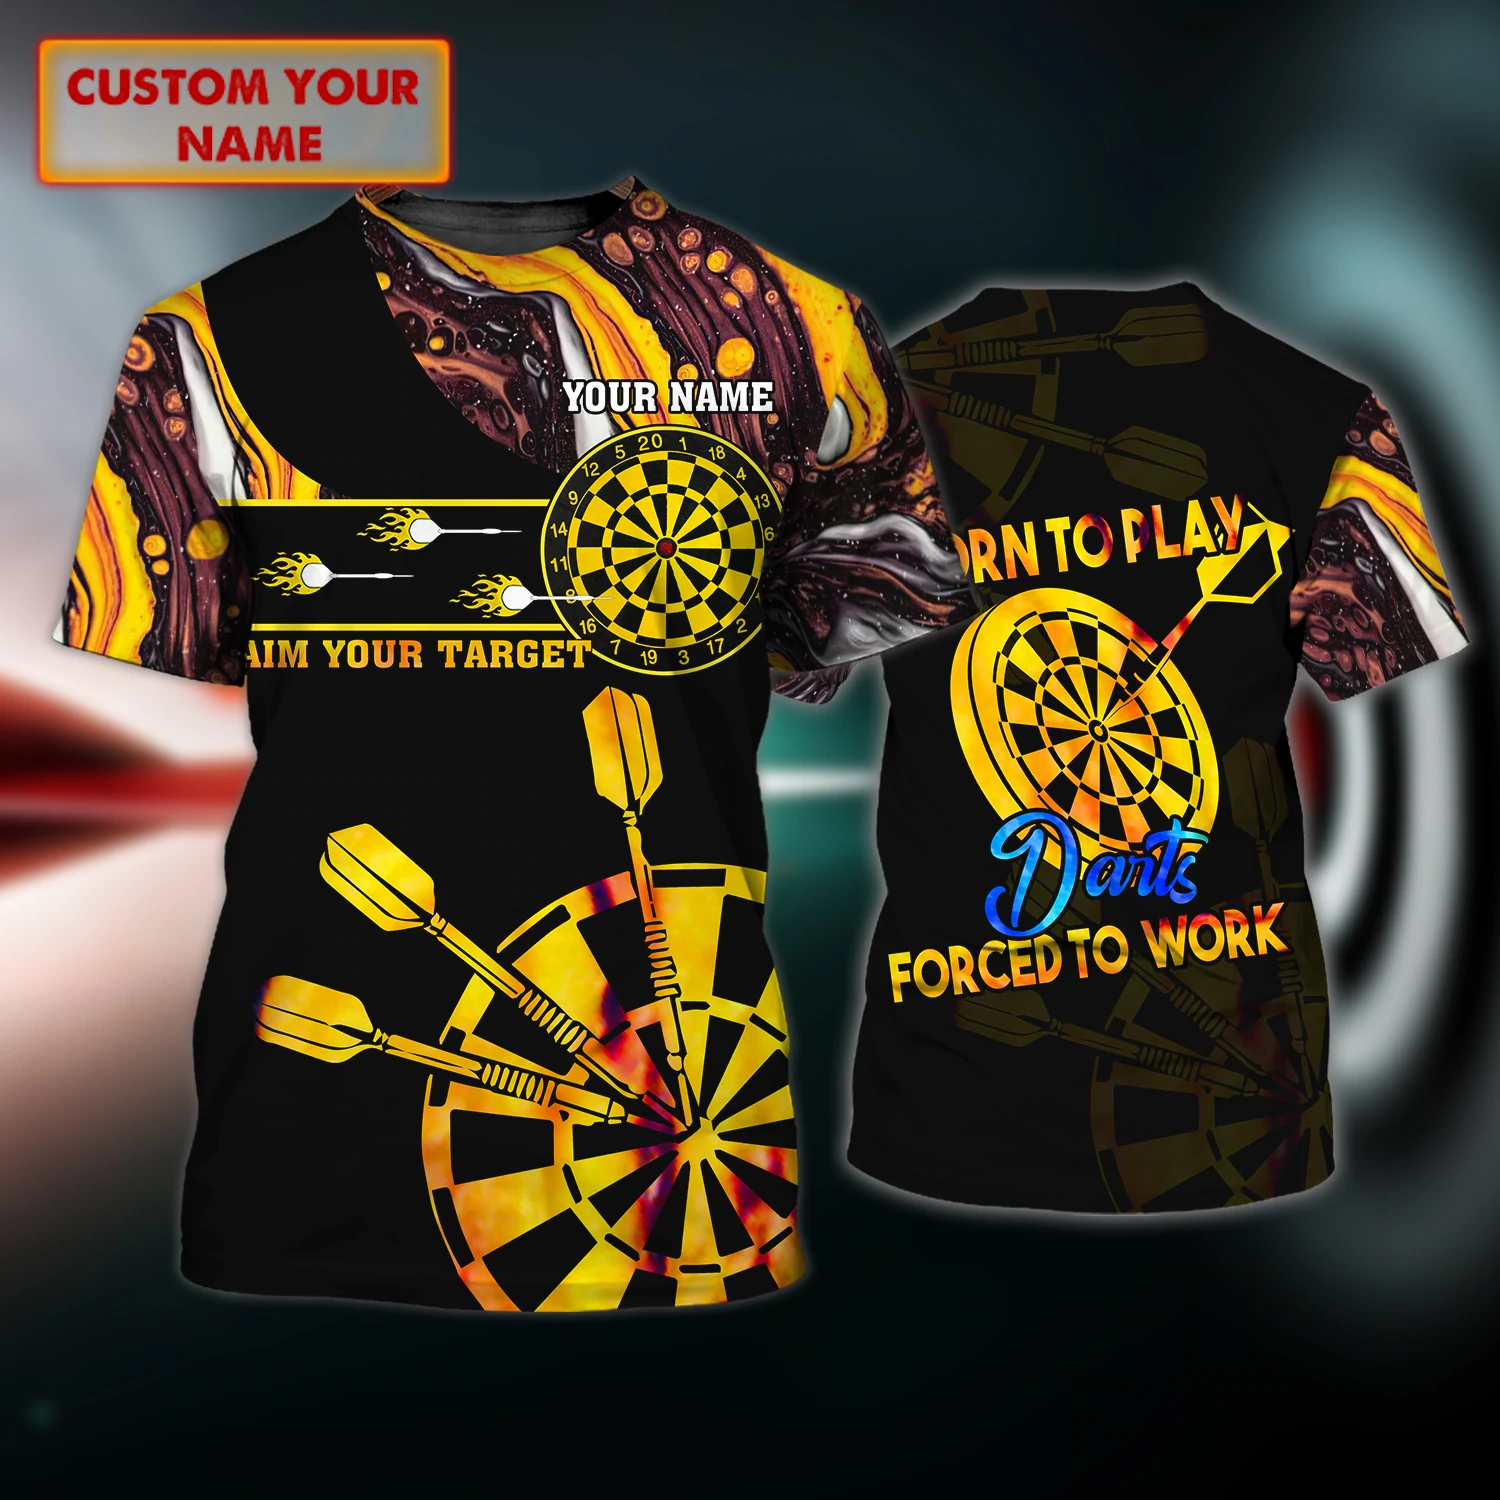 darts 3d all over printed shirt for men born to play darts personalized name 3d tshirt dt131 xzkgg